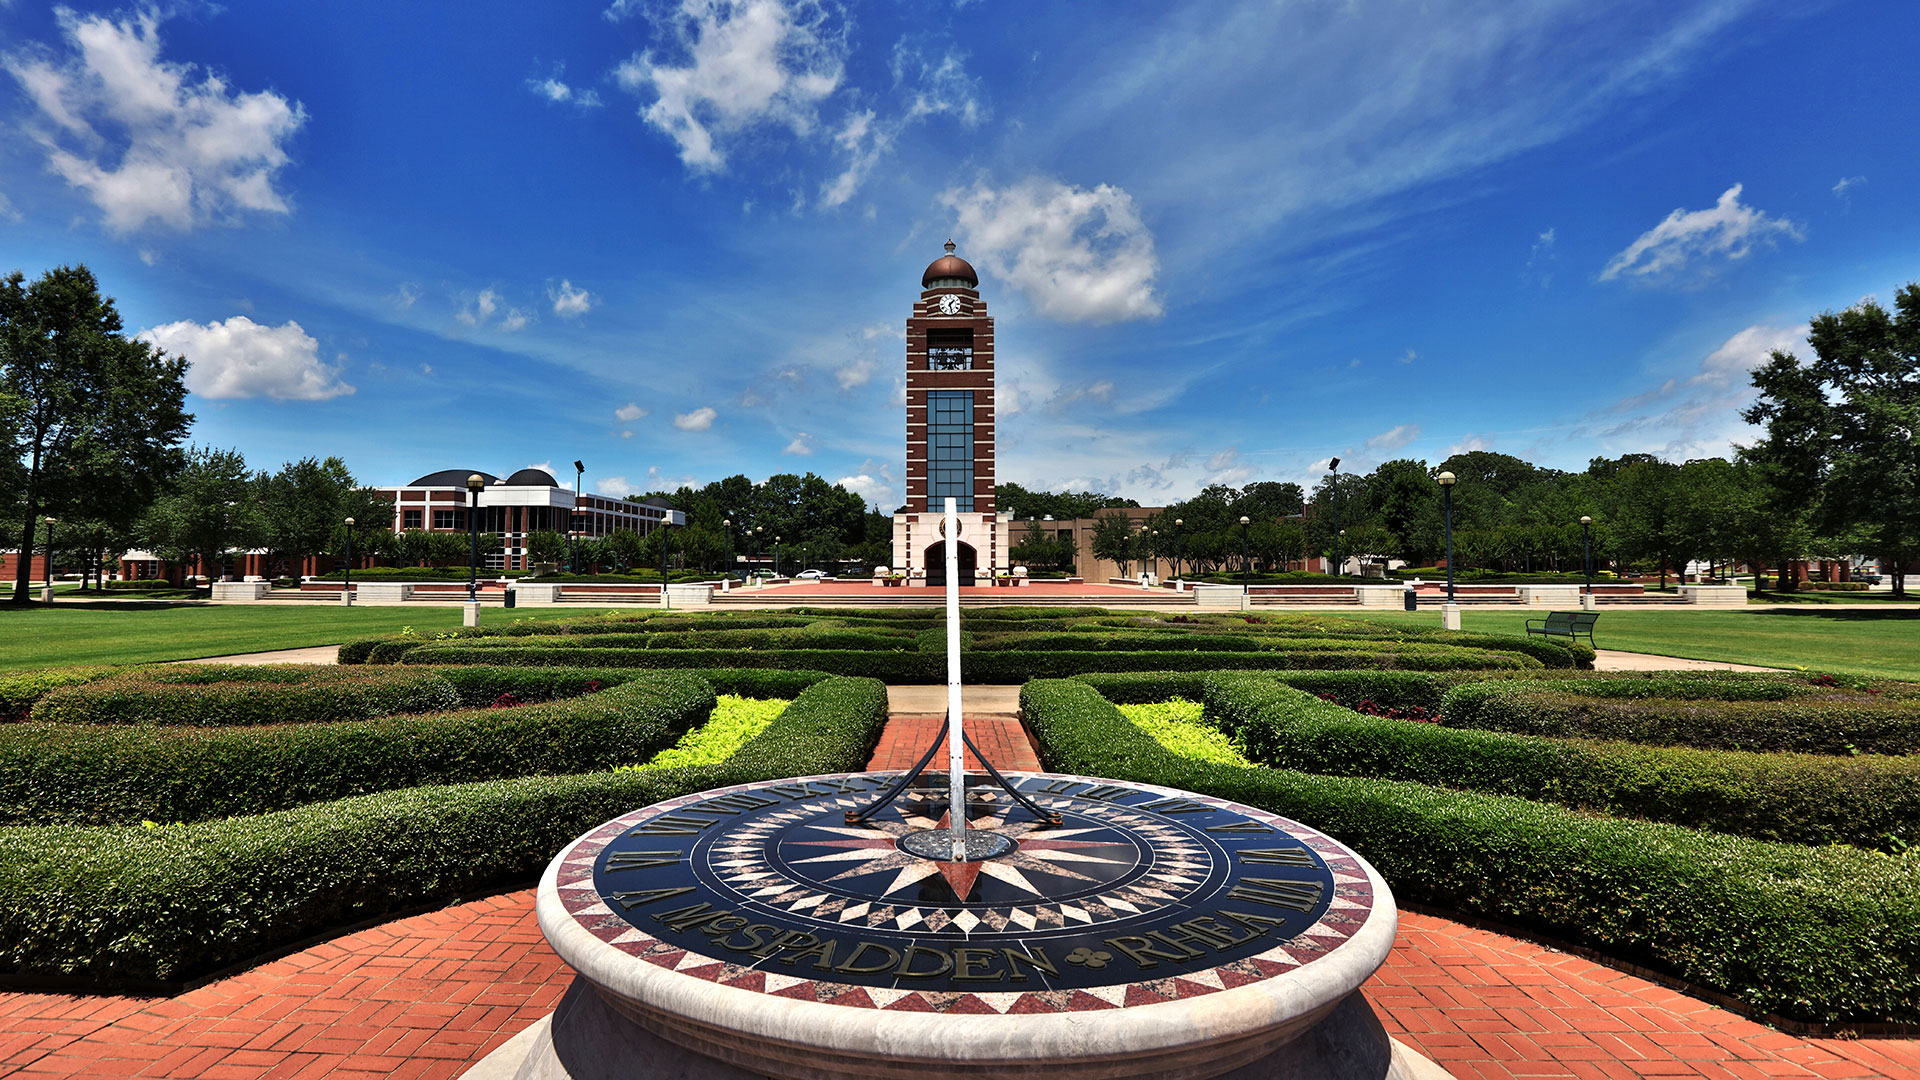 UAFS sundial stands in front of the university bell tower on a summer day